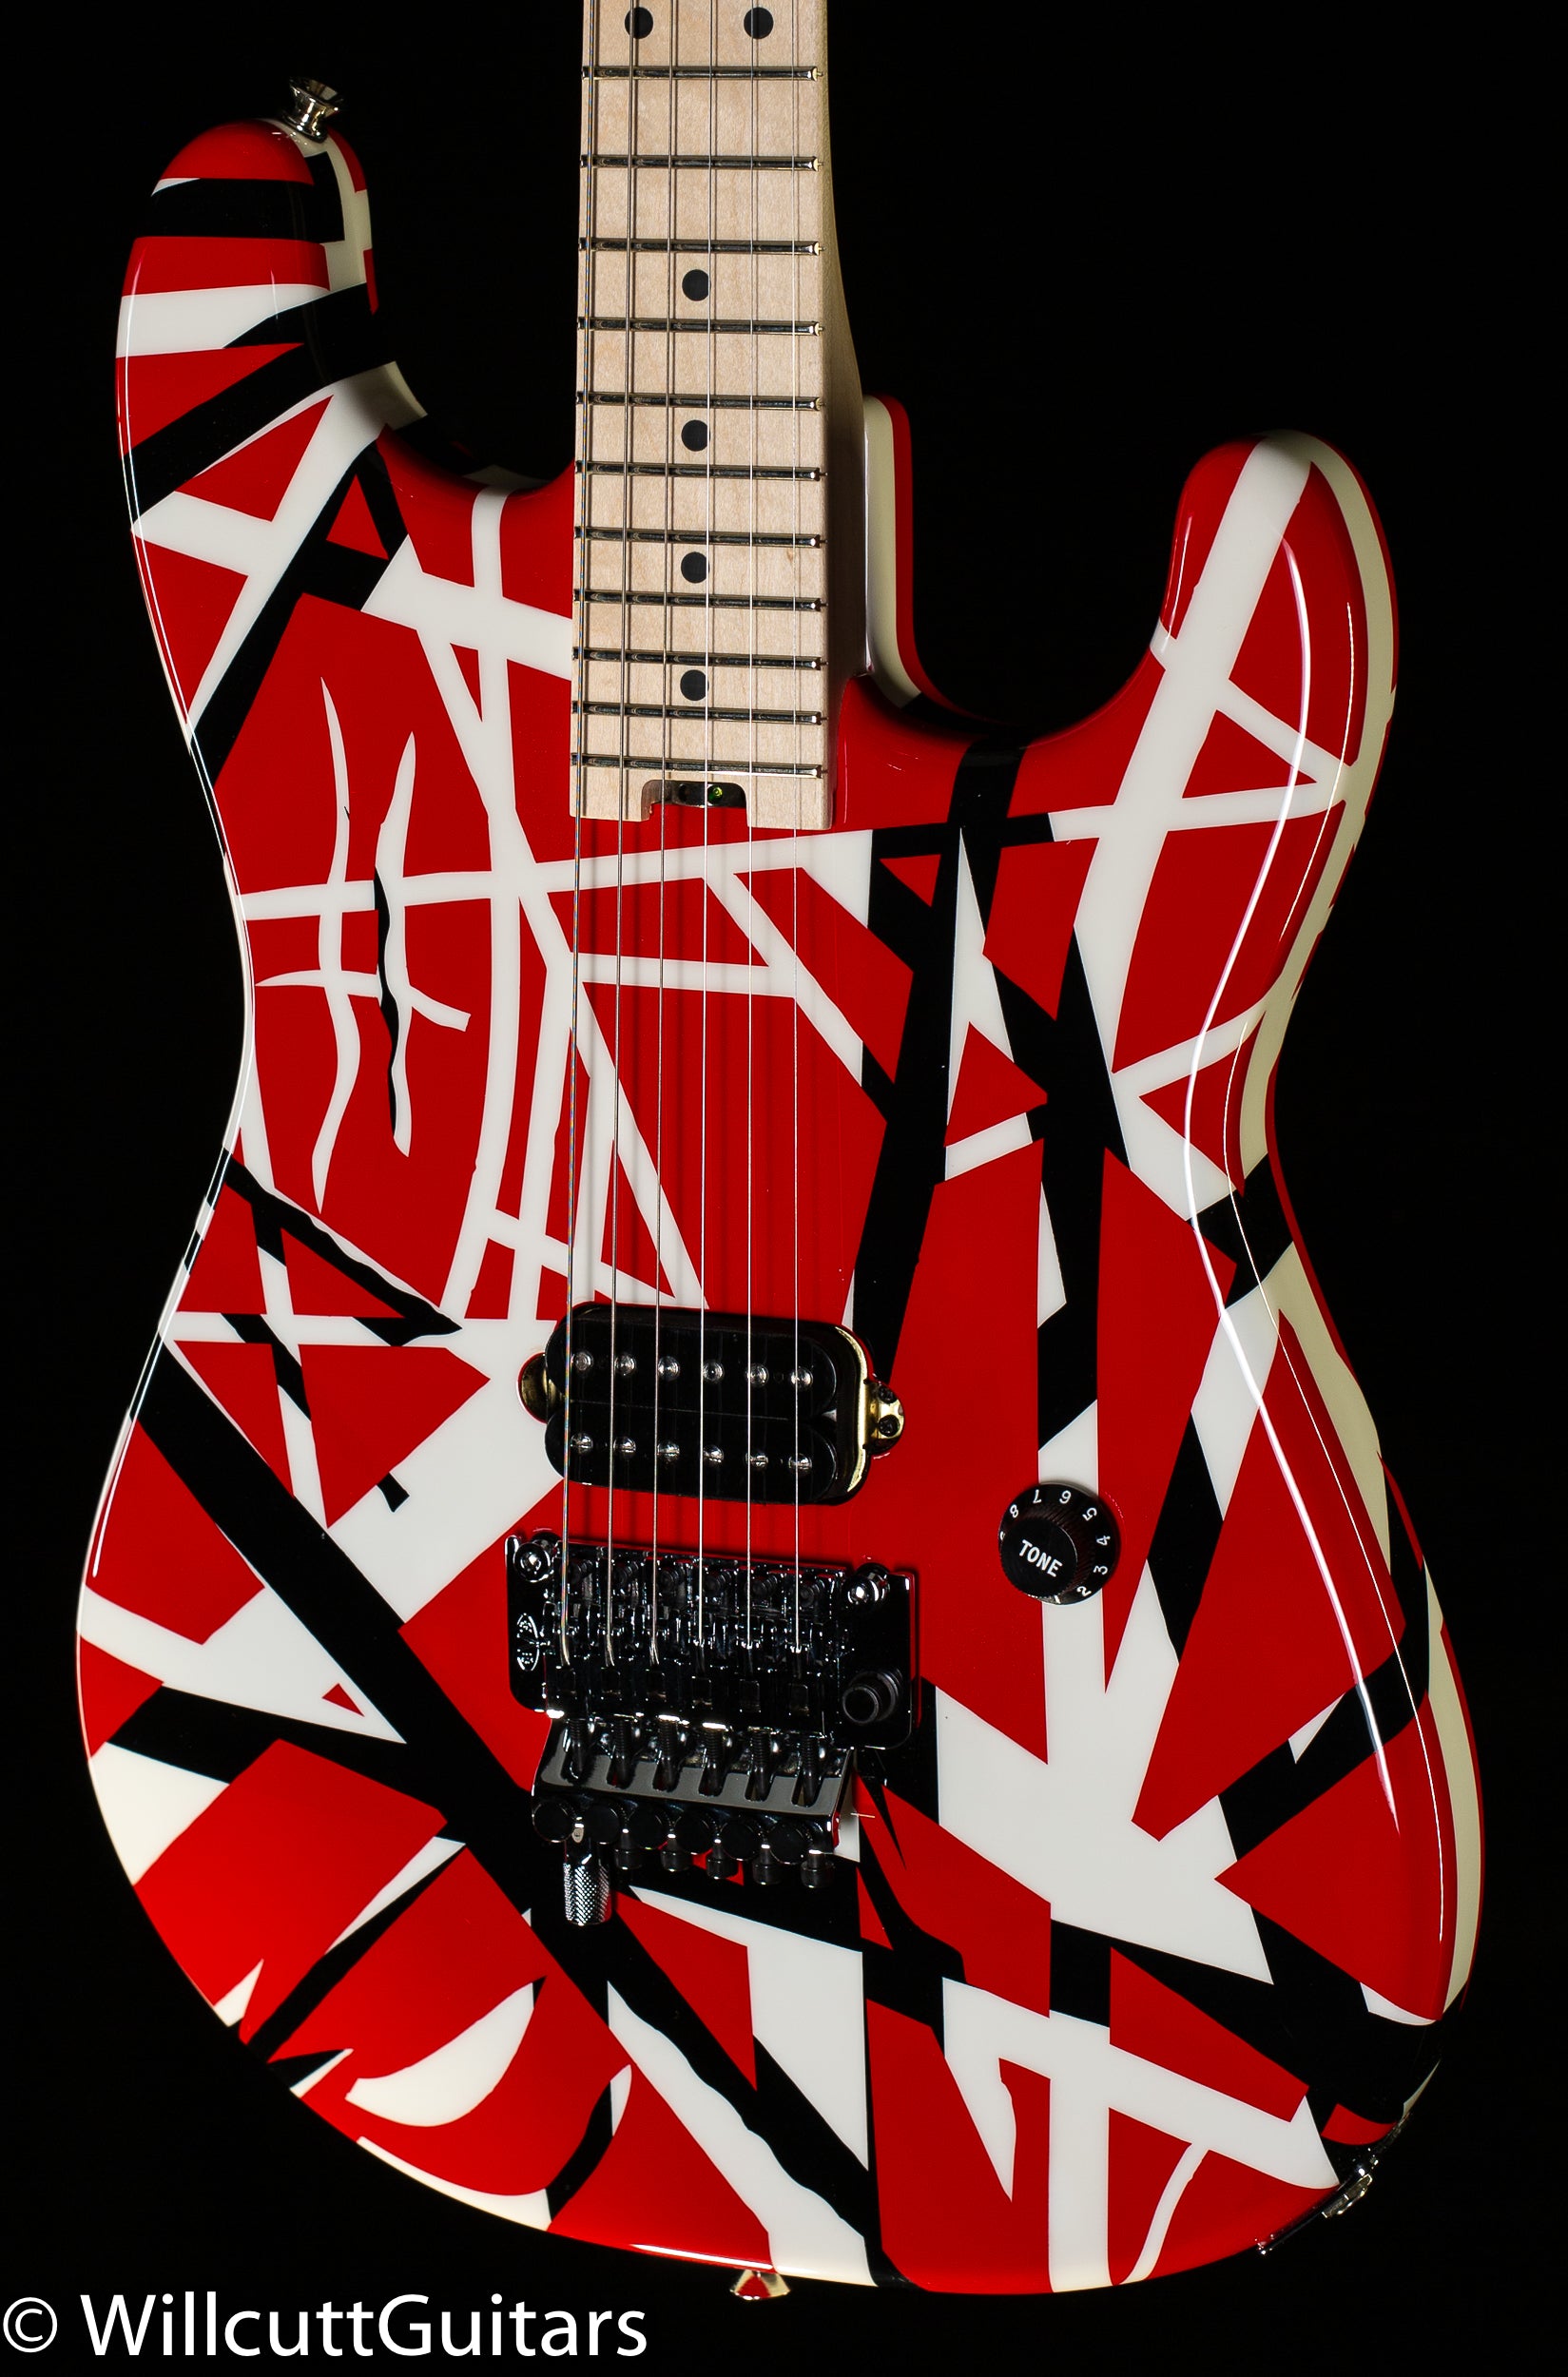 EVH Striped Series Red with Black Stripes - Willcutt Guitars